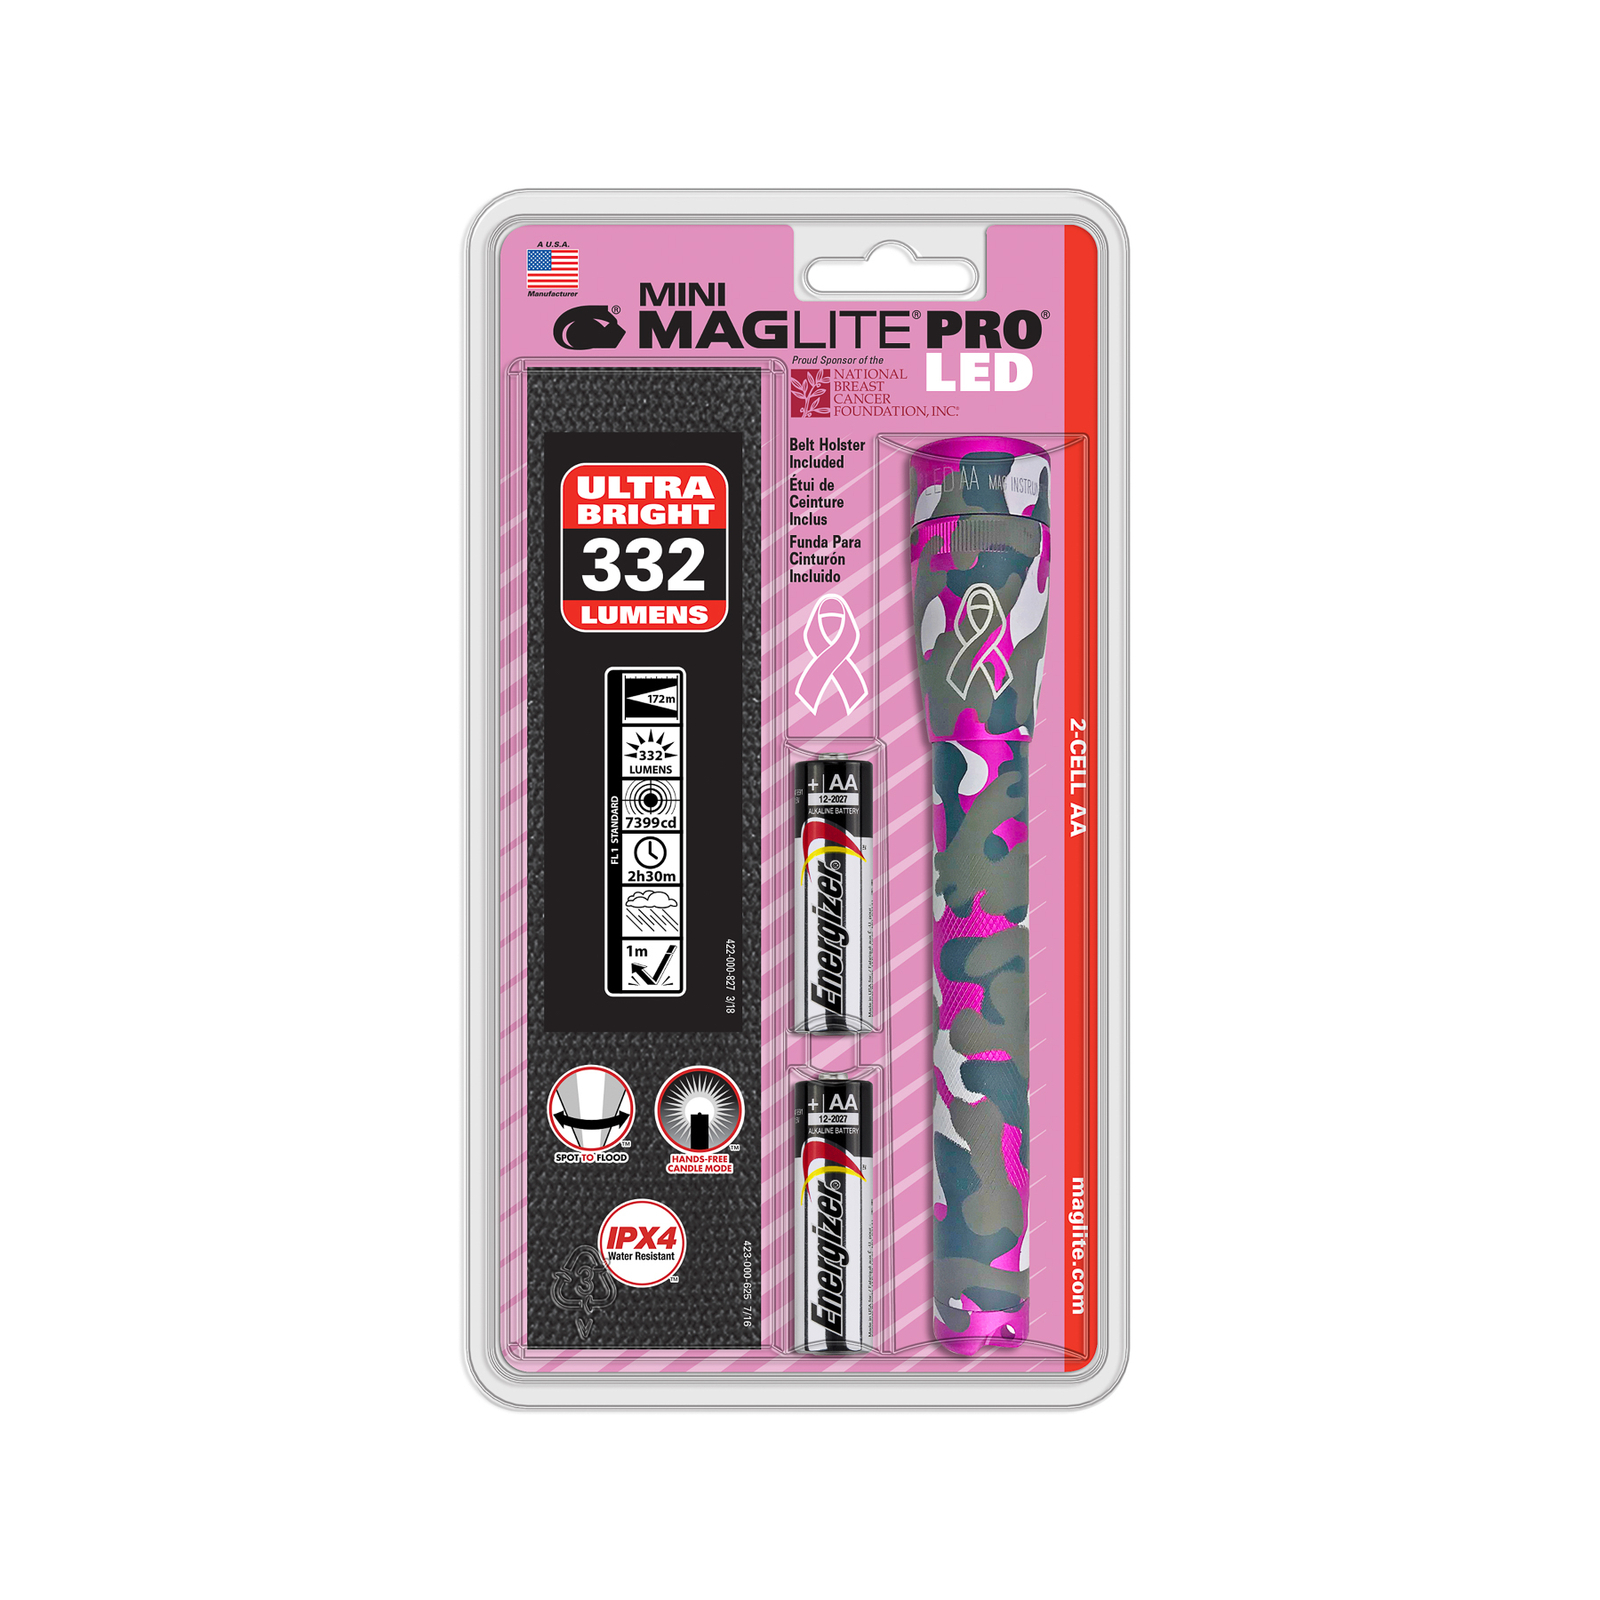 Maglite LED-lommelygte Mini Pro, 2 celler AA, NBCF pink camo